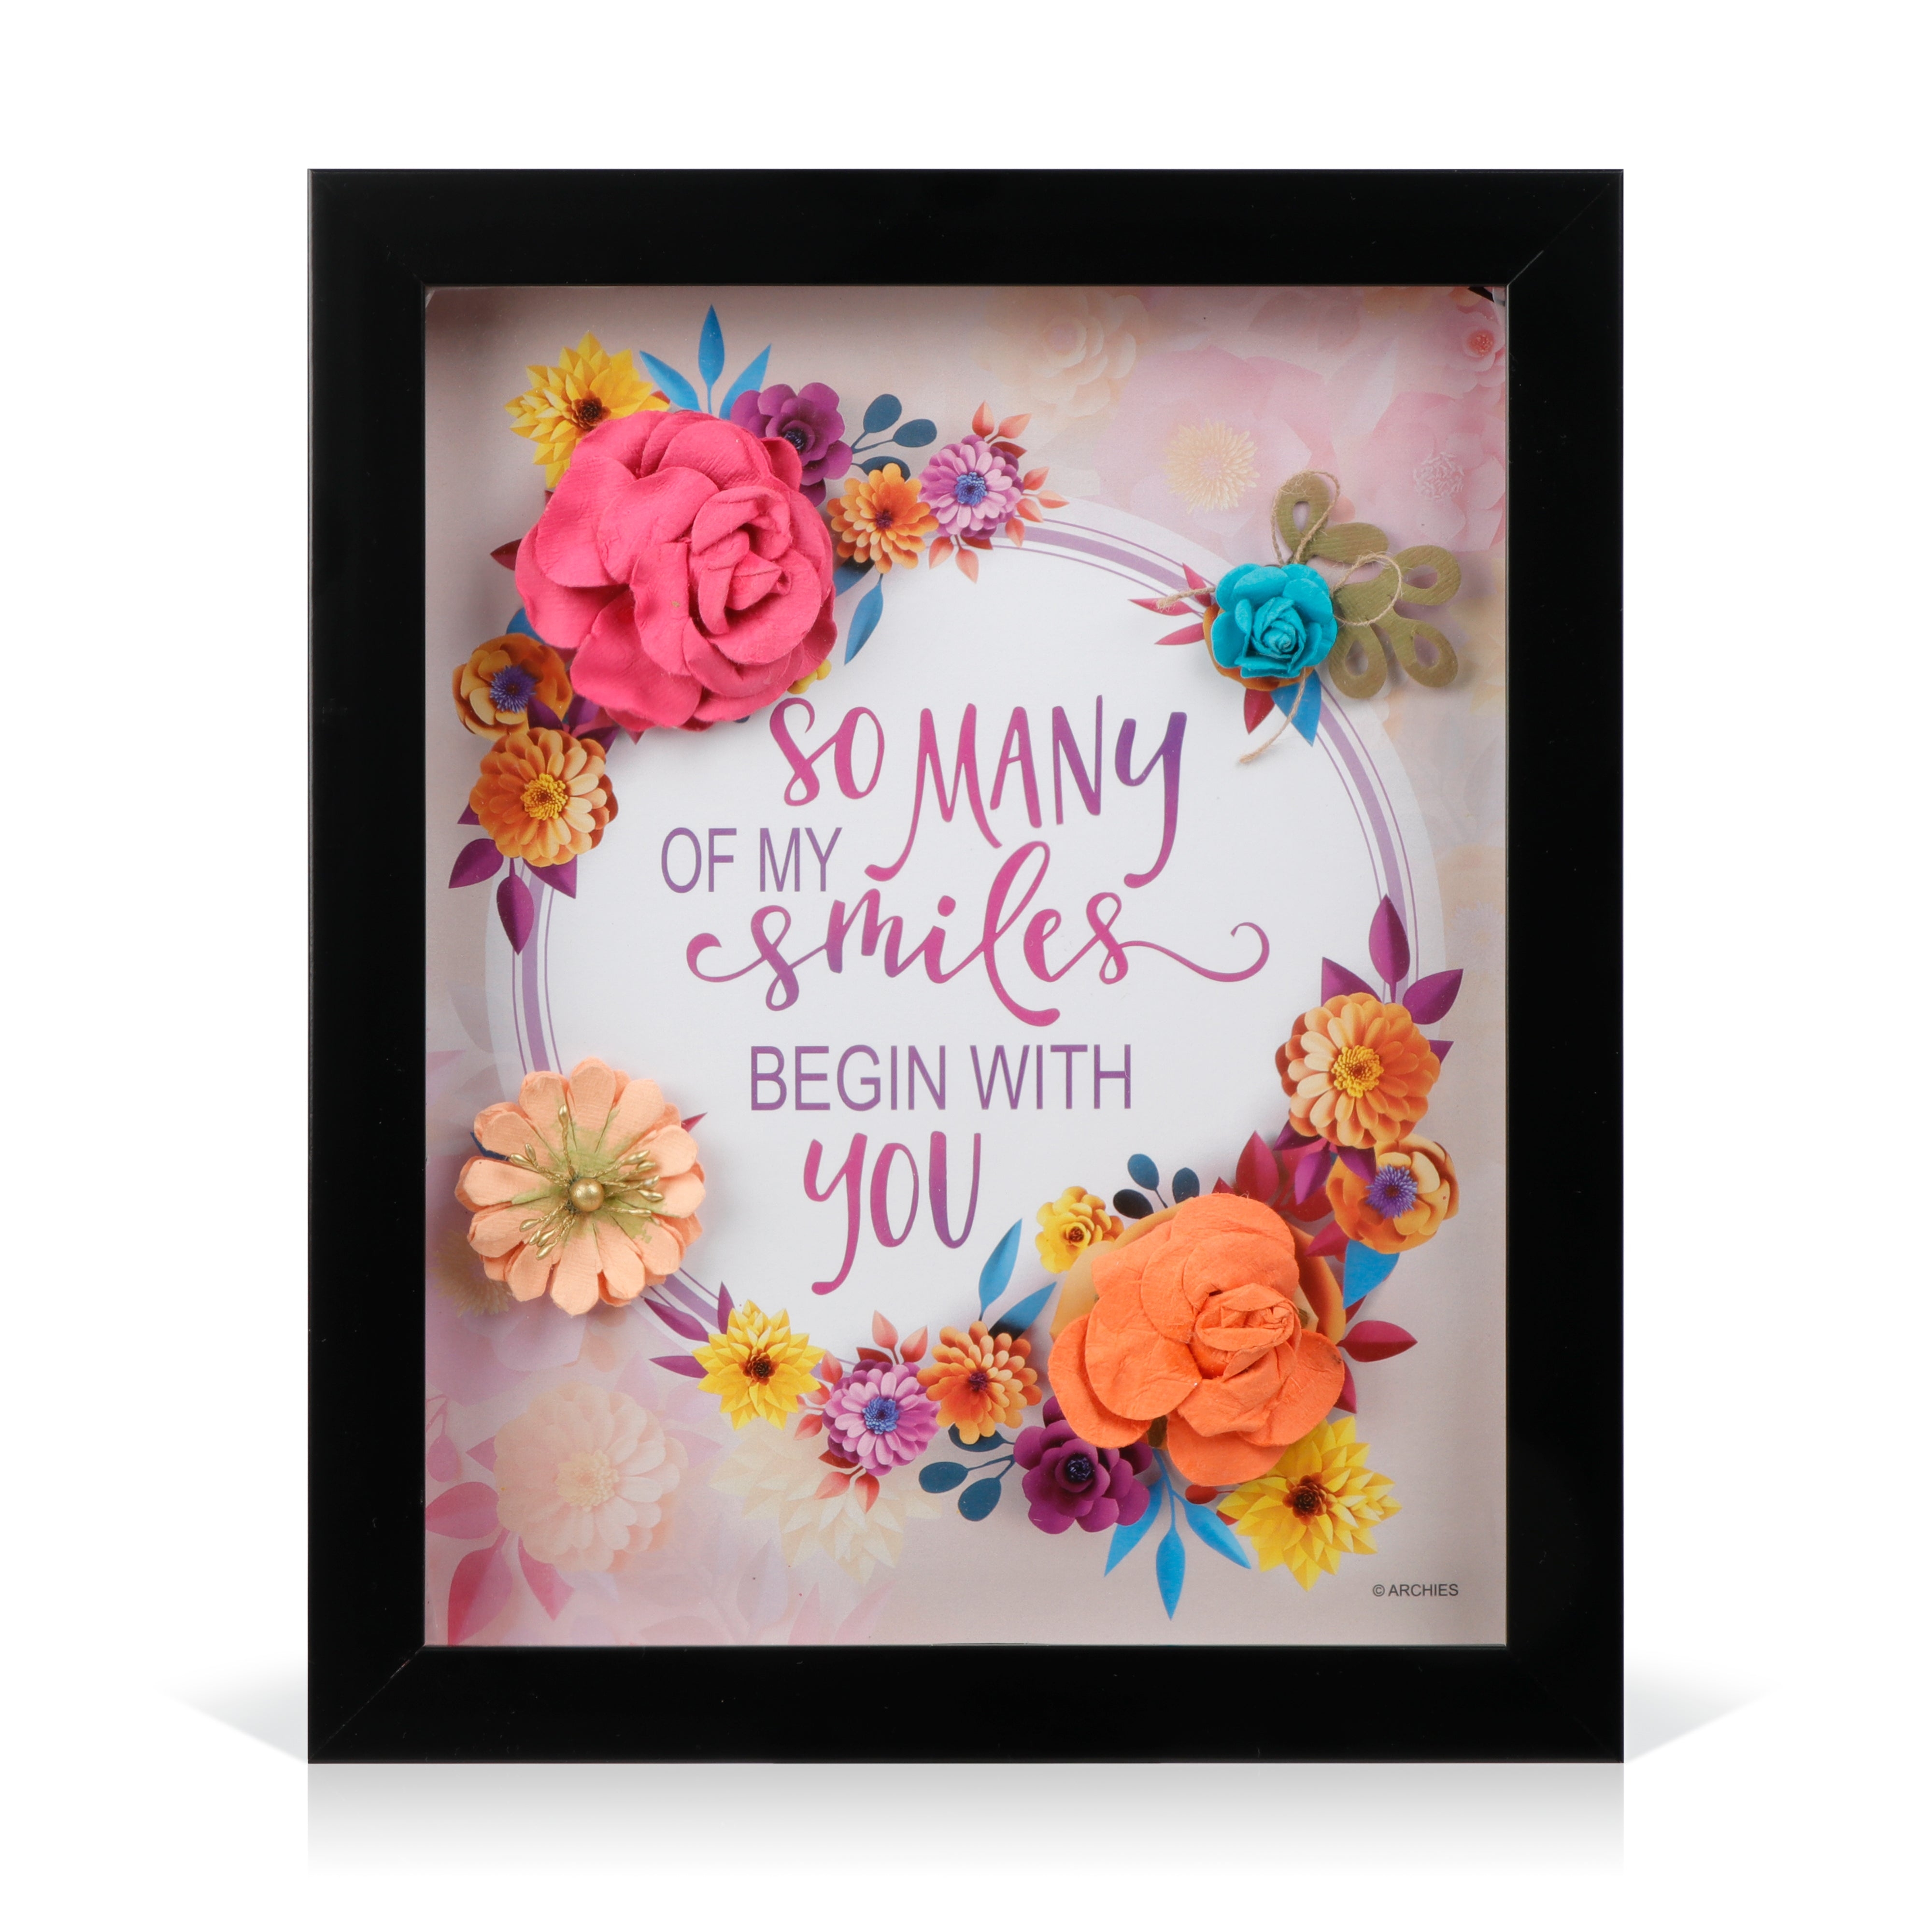 Archies | Archies KEEPSAKE QUOTATION - SO MANY OFSMILES ... For gifting and Home décor